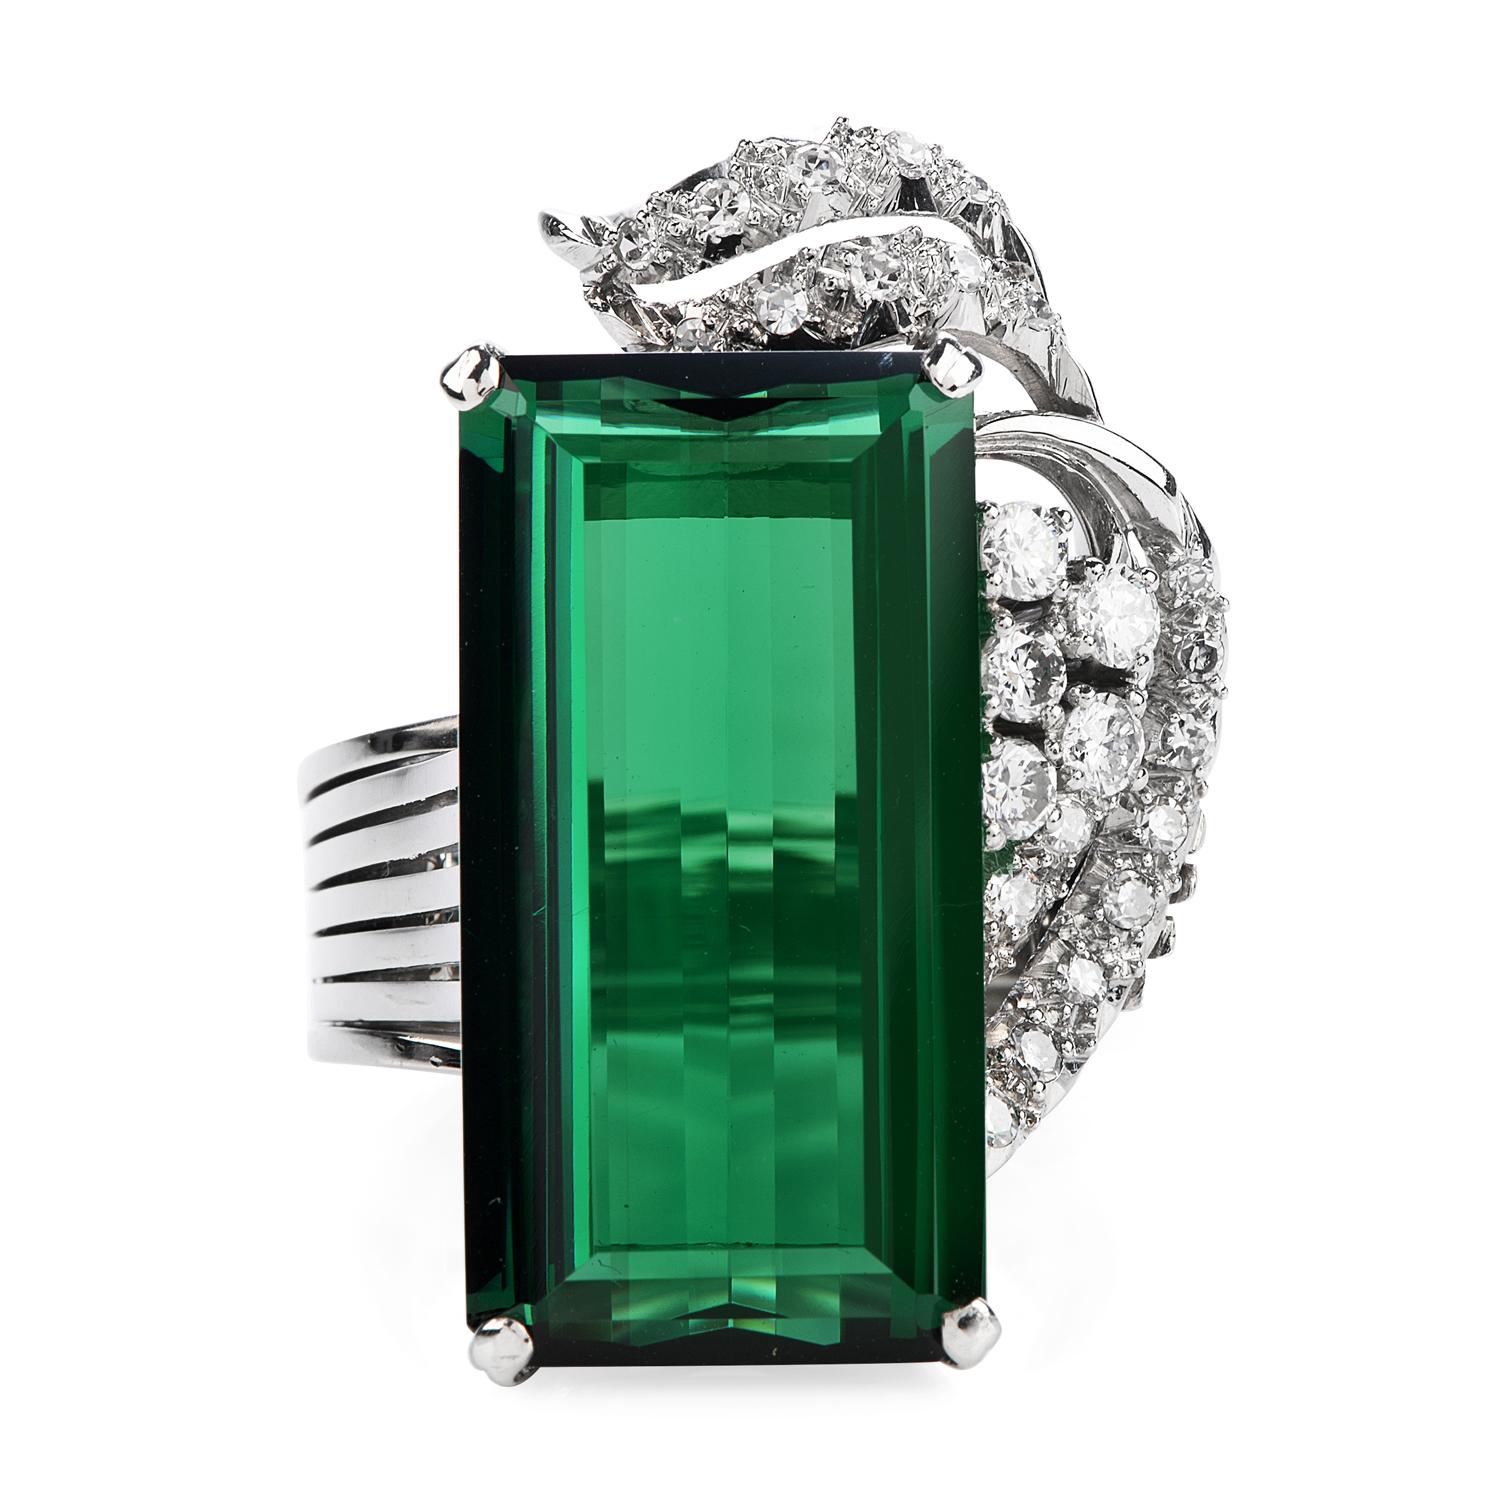 Vintage style GIA certified Green Tourmaline & Diamond cocktail ring, with dazzling floral & ribbon side design.

Crafted in solid platinum, the center is adorned by a GIA certified Green Tourmaline, octagonal step cut, prong set, weighing